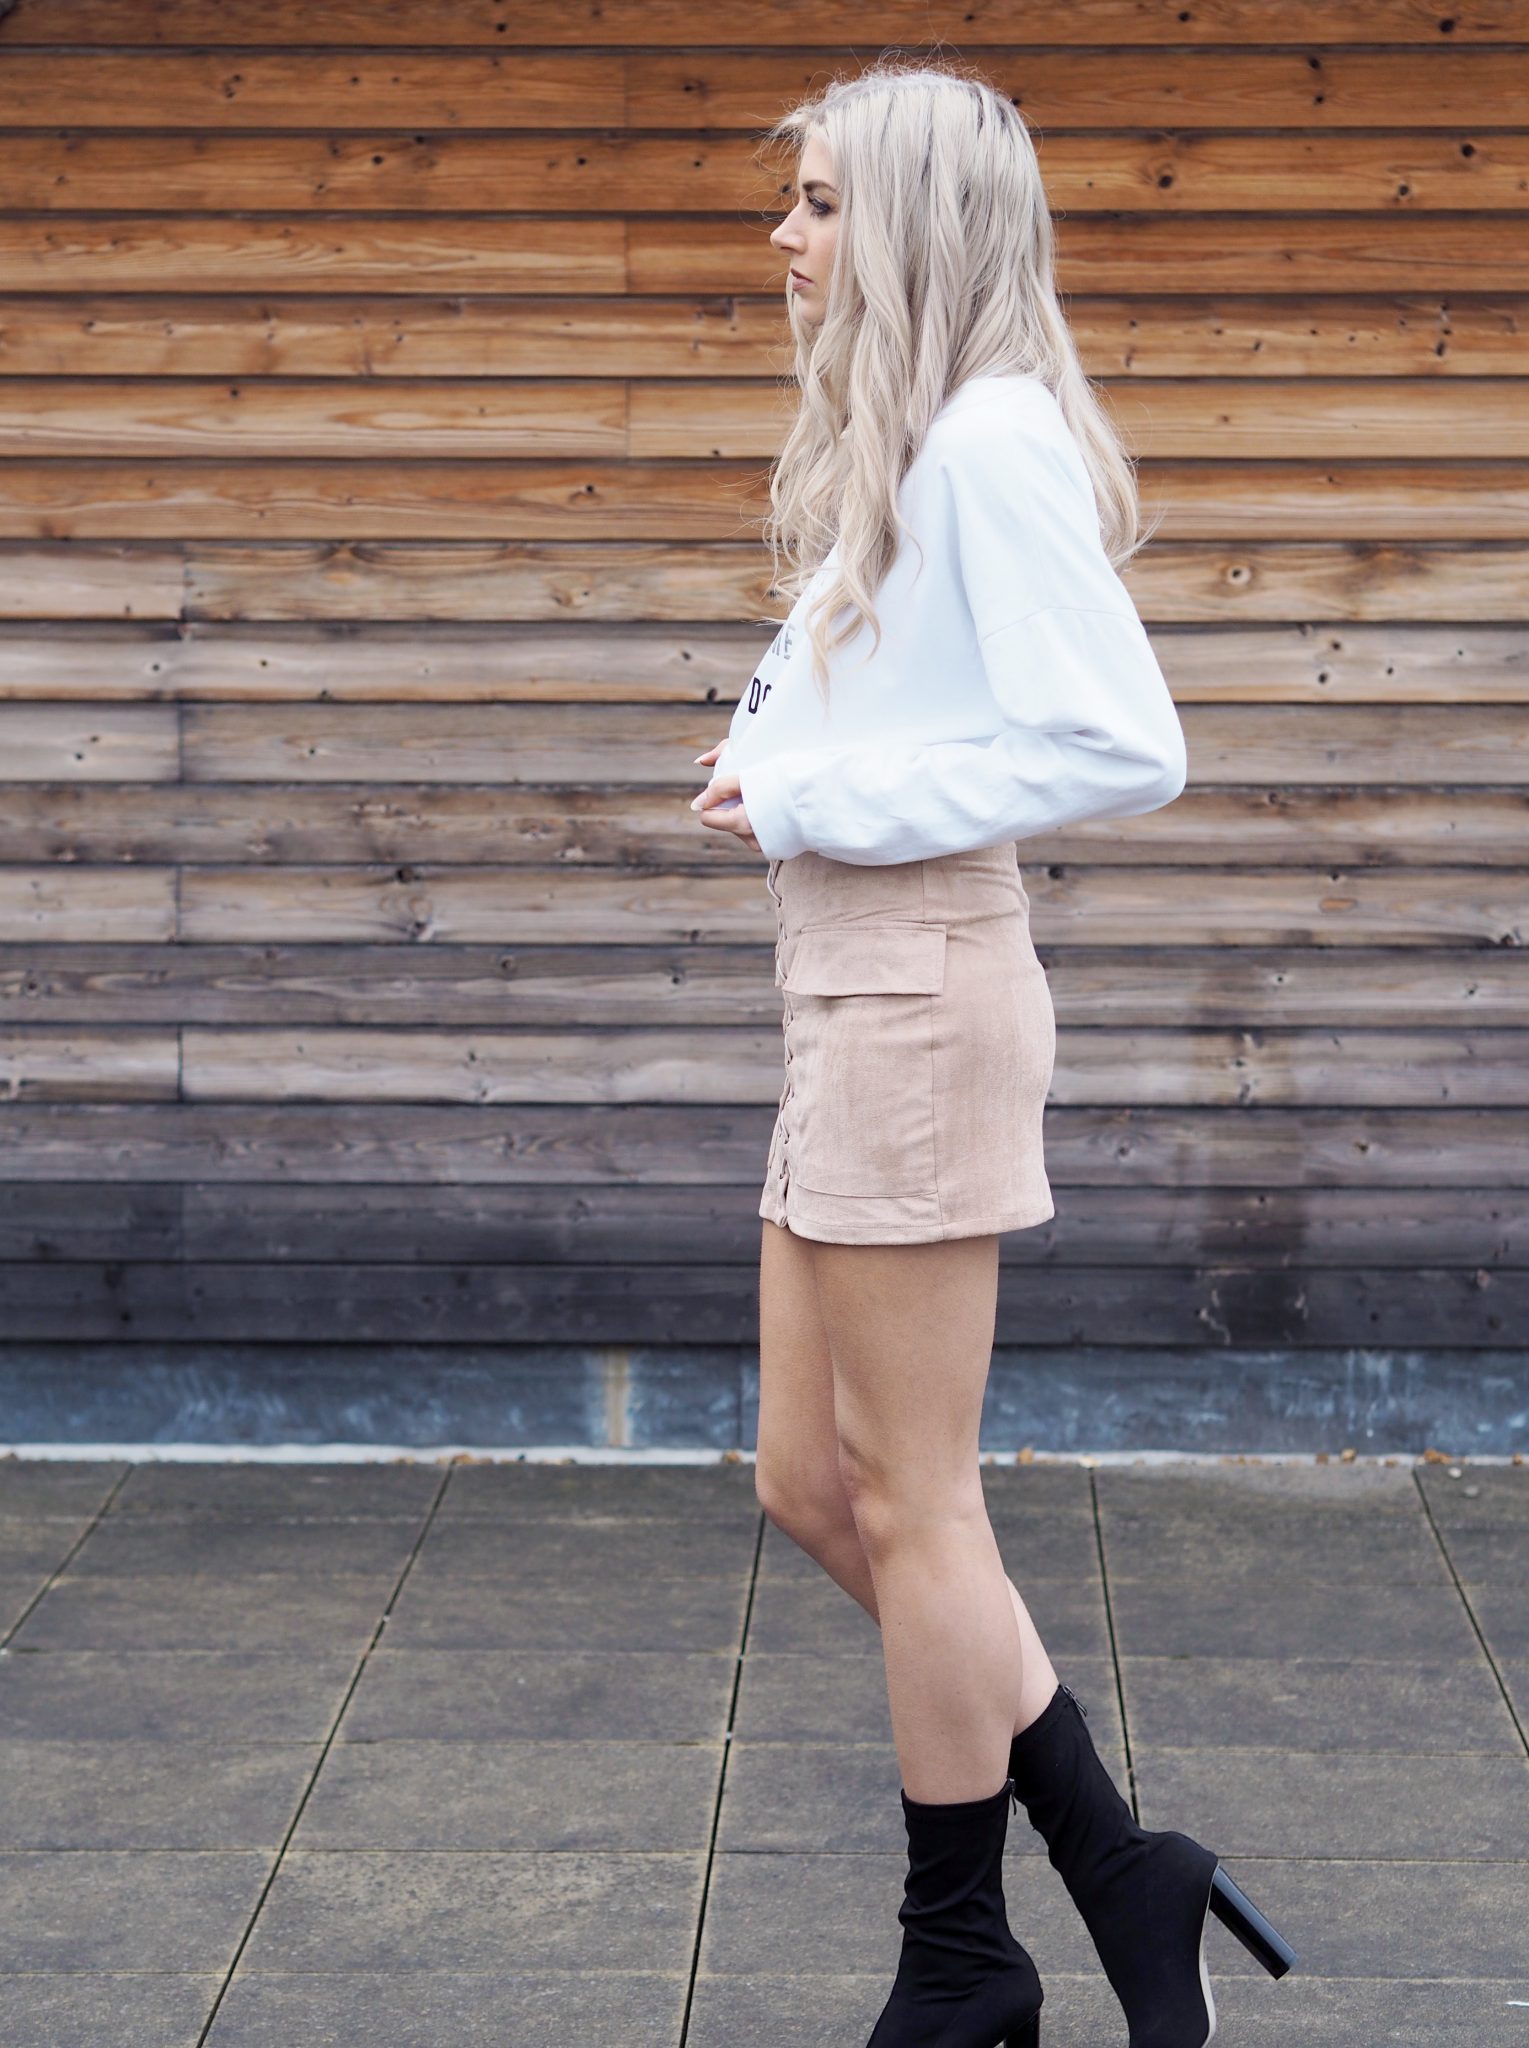 Laura Kate Lucas - Manchester Fashion and Lifestyle Blogger | Outfit post featuring Off Dutee Margaritas Made Me Do It Jumper, Misspap Lace Suede Skirt & Public Desire Boots